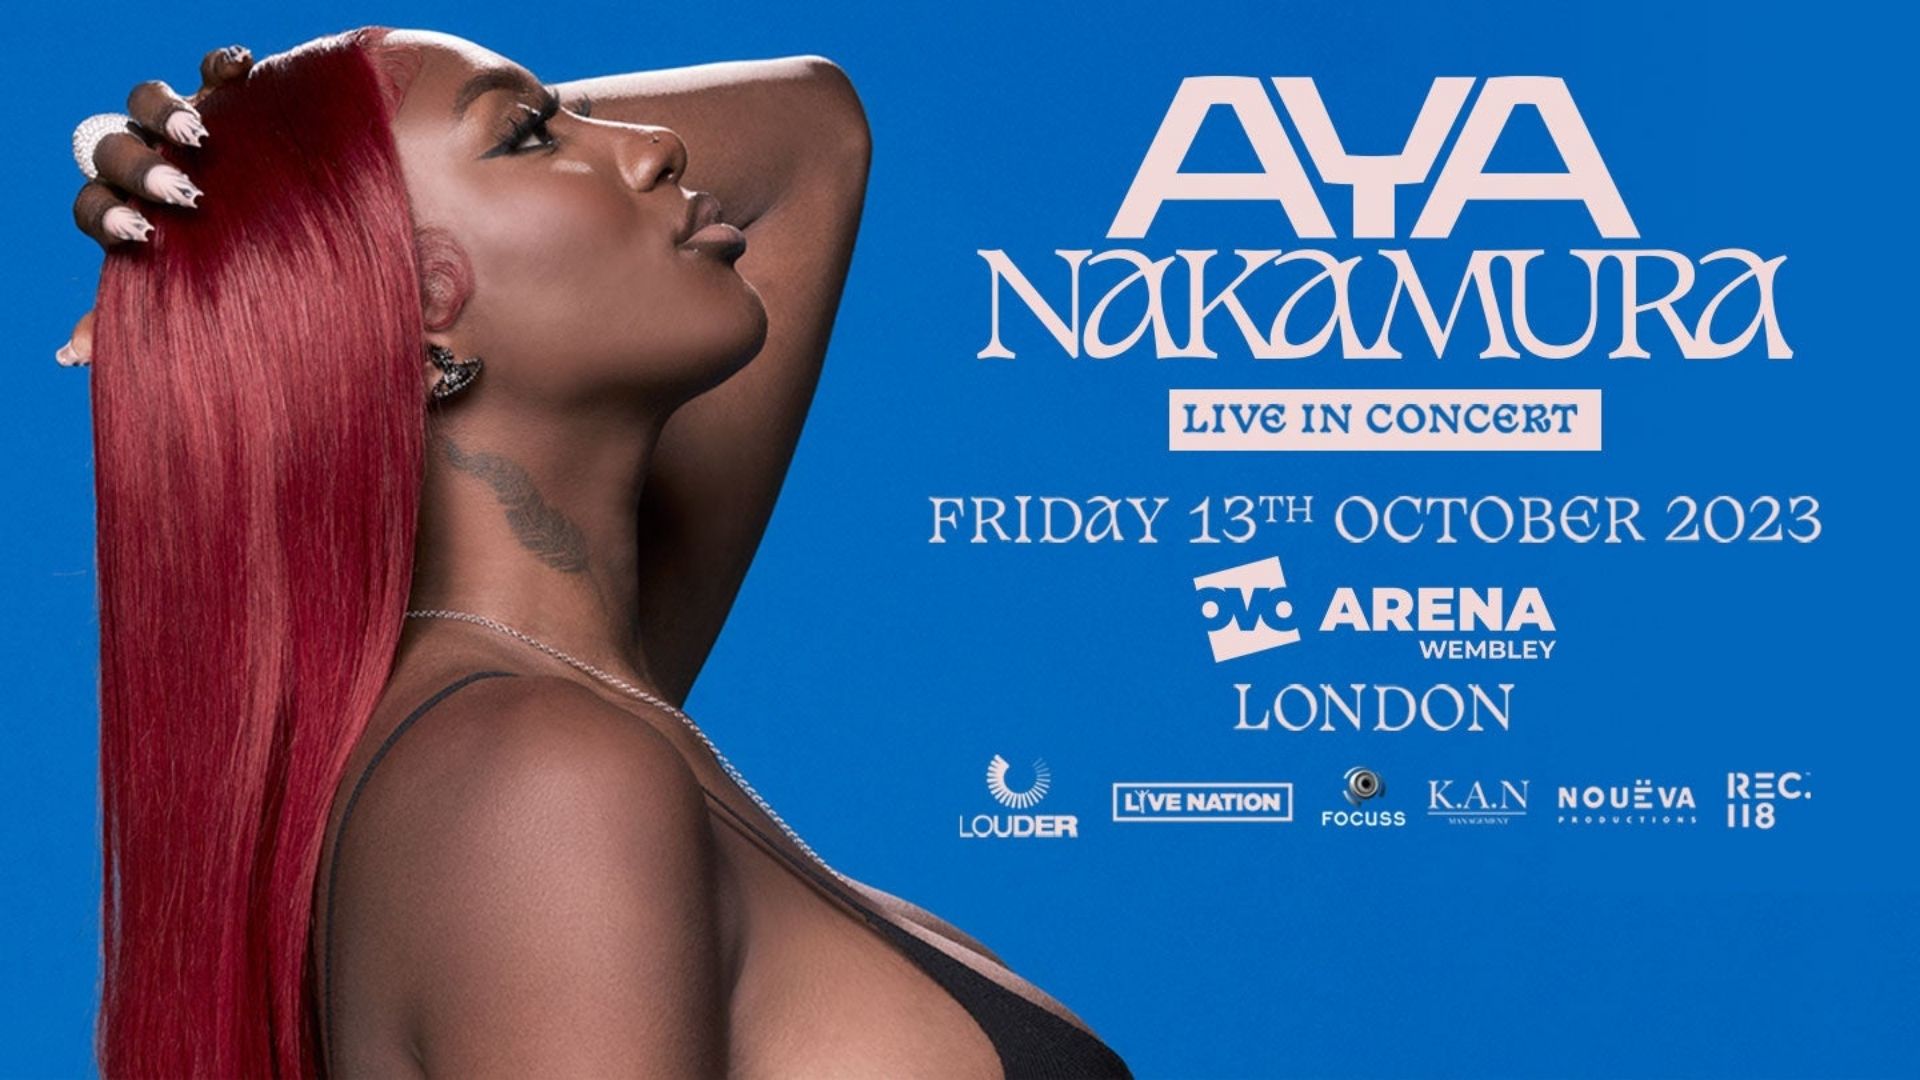 Aya Nakamura is set to light up the OVO Arena in Wembley, London. Circle the date, folks – 13th of October 2023